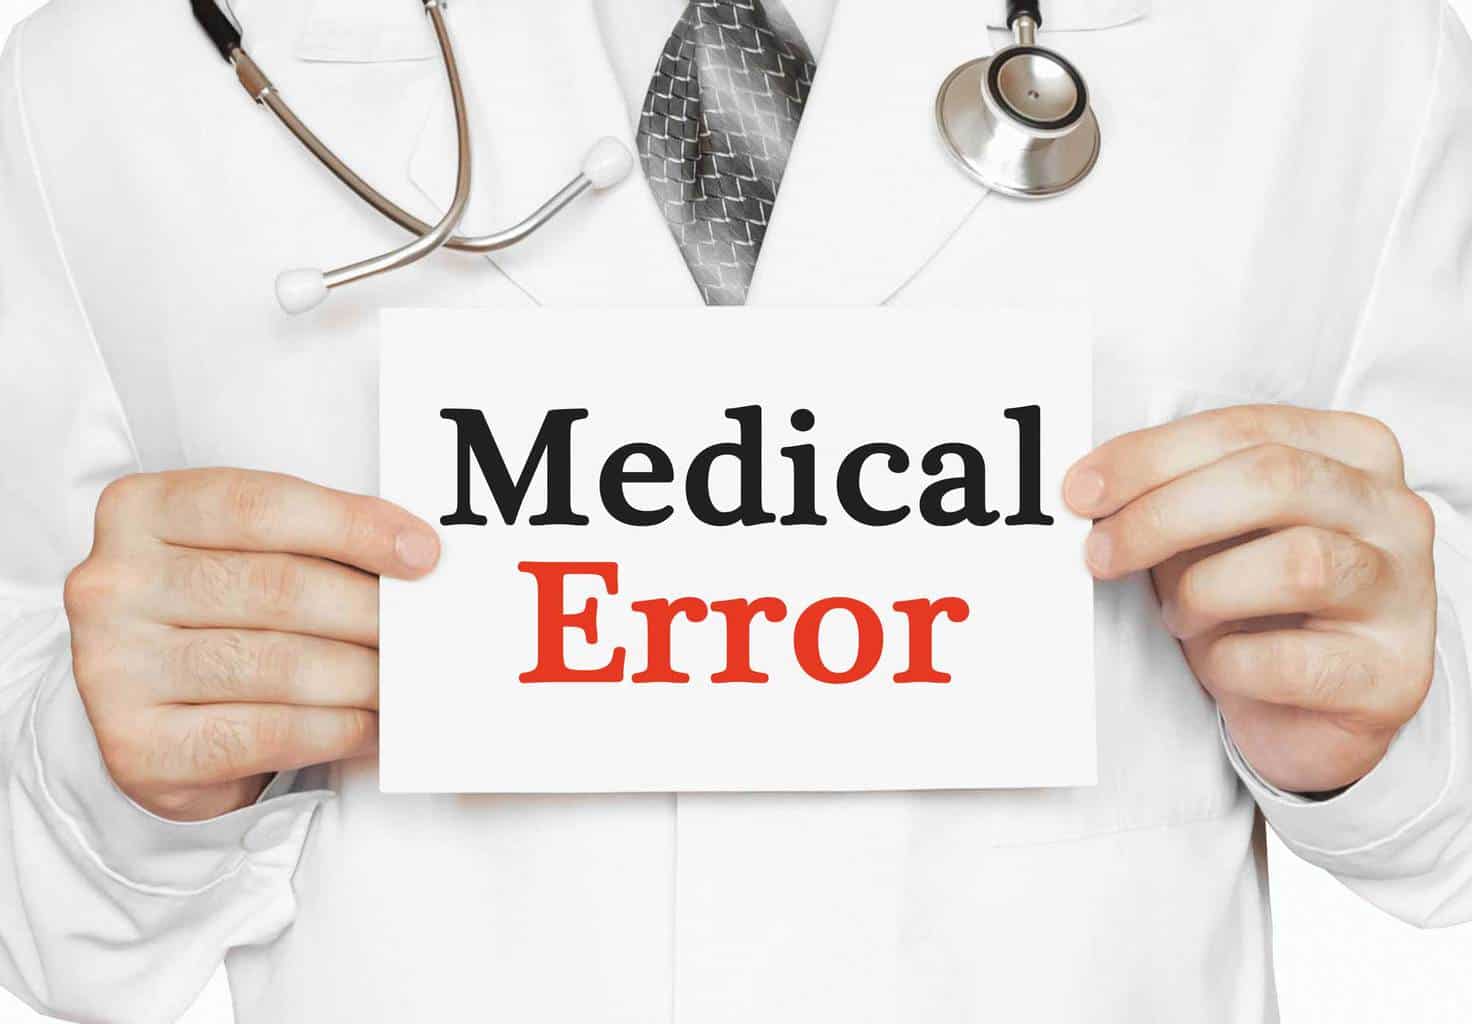 Medical Malpractice lawyers can help you with your case